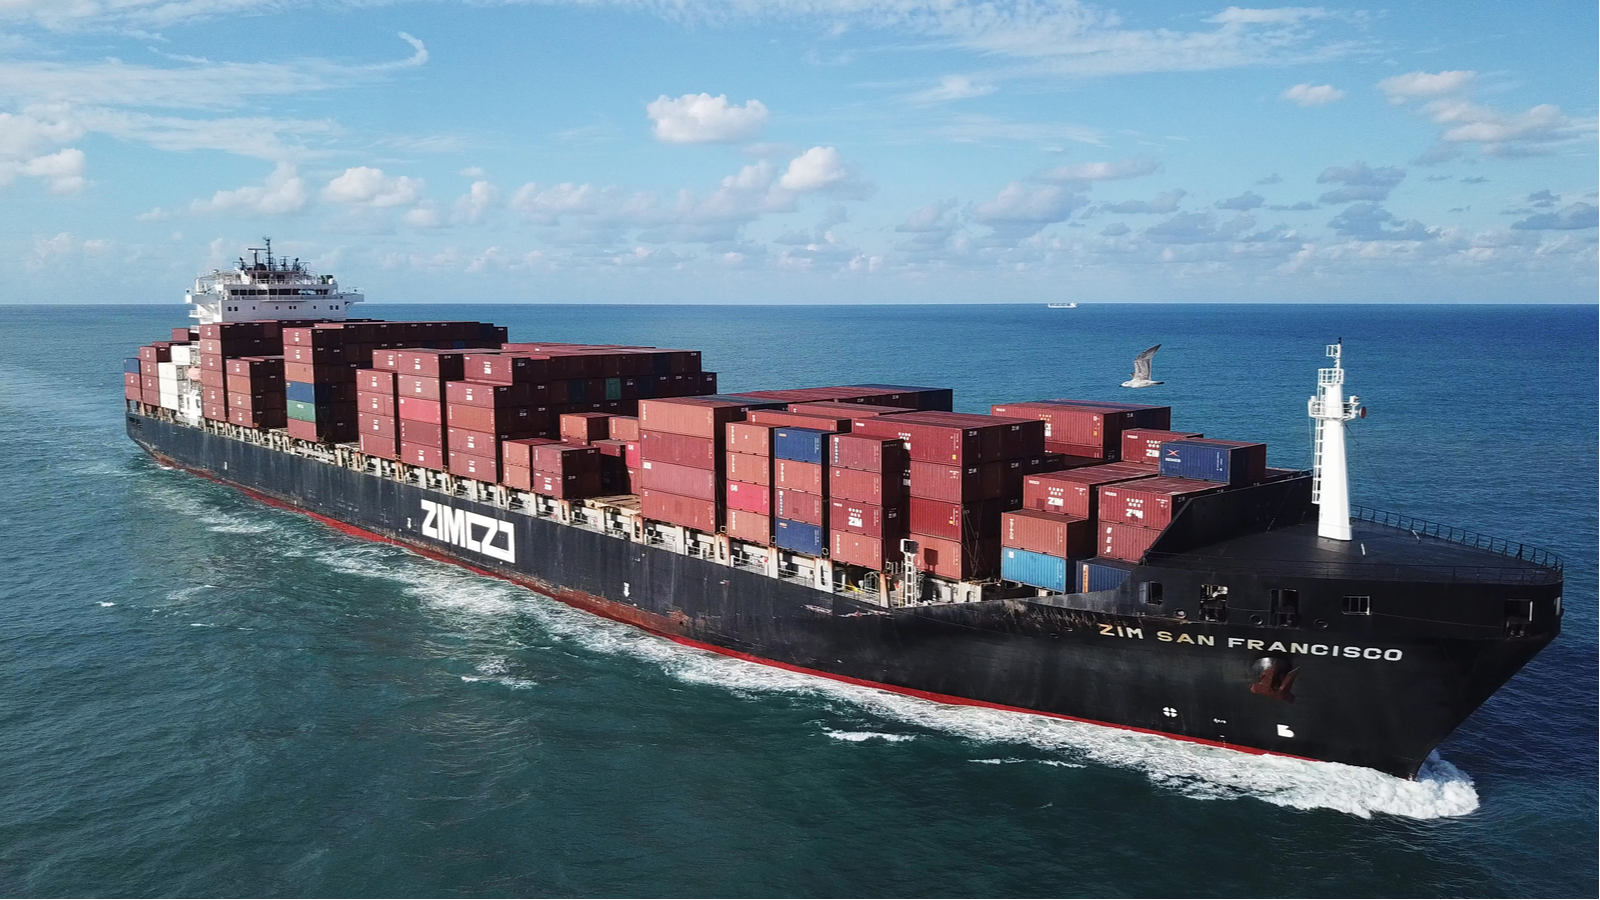 A large ULCV container ship underway, sails on open water fully loaded with containers and cargo shipping stocks.